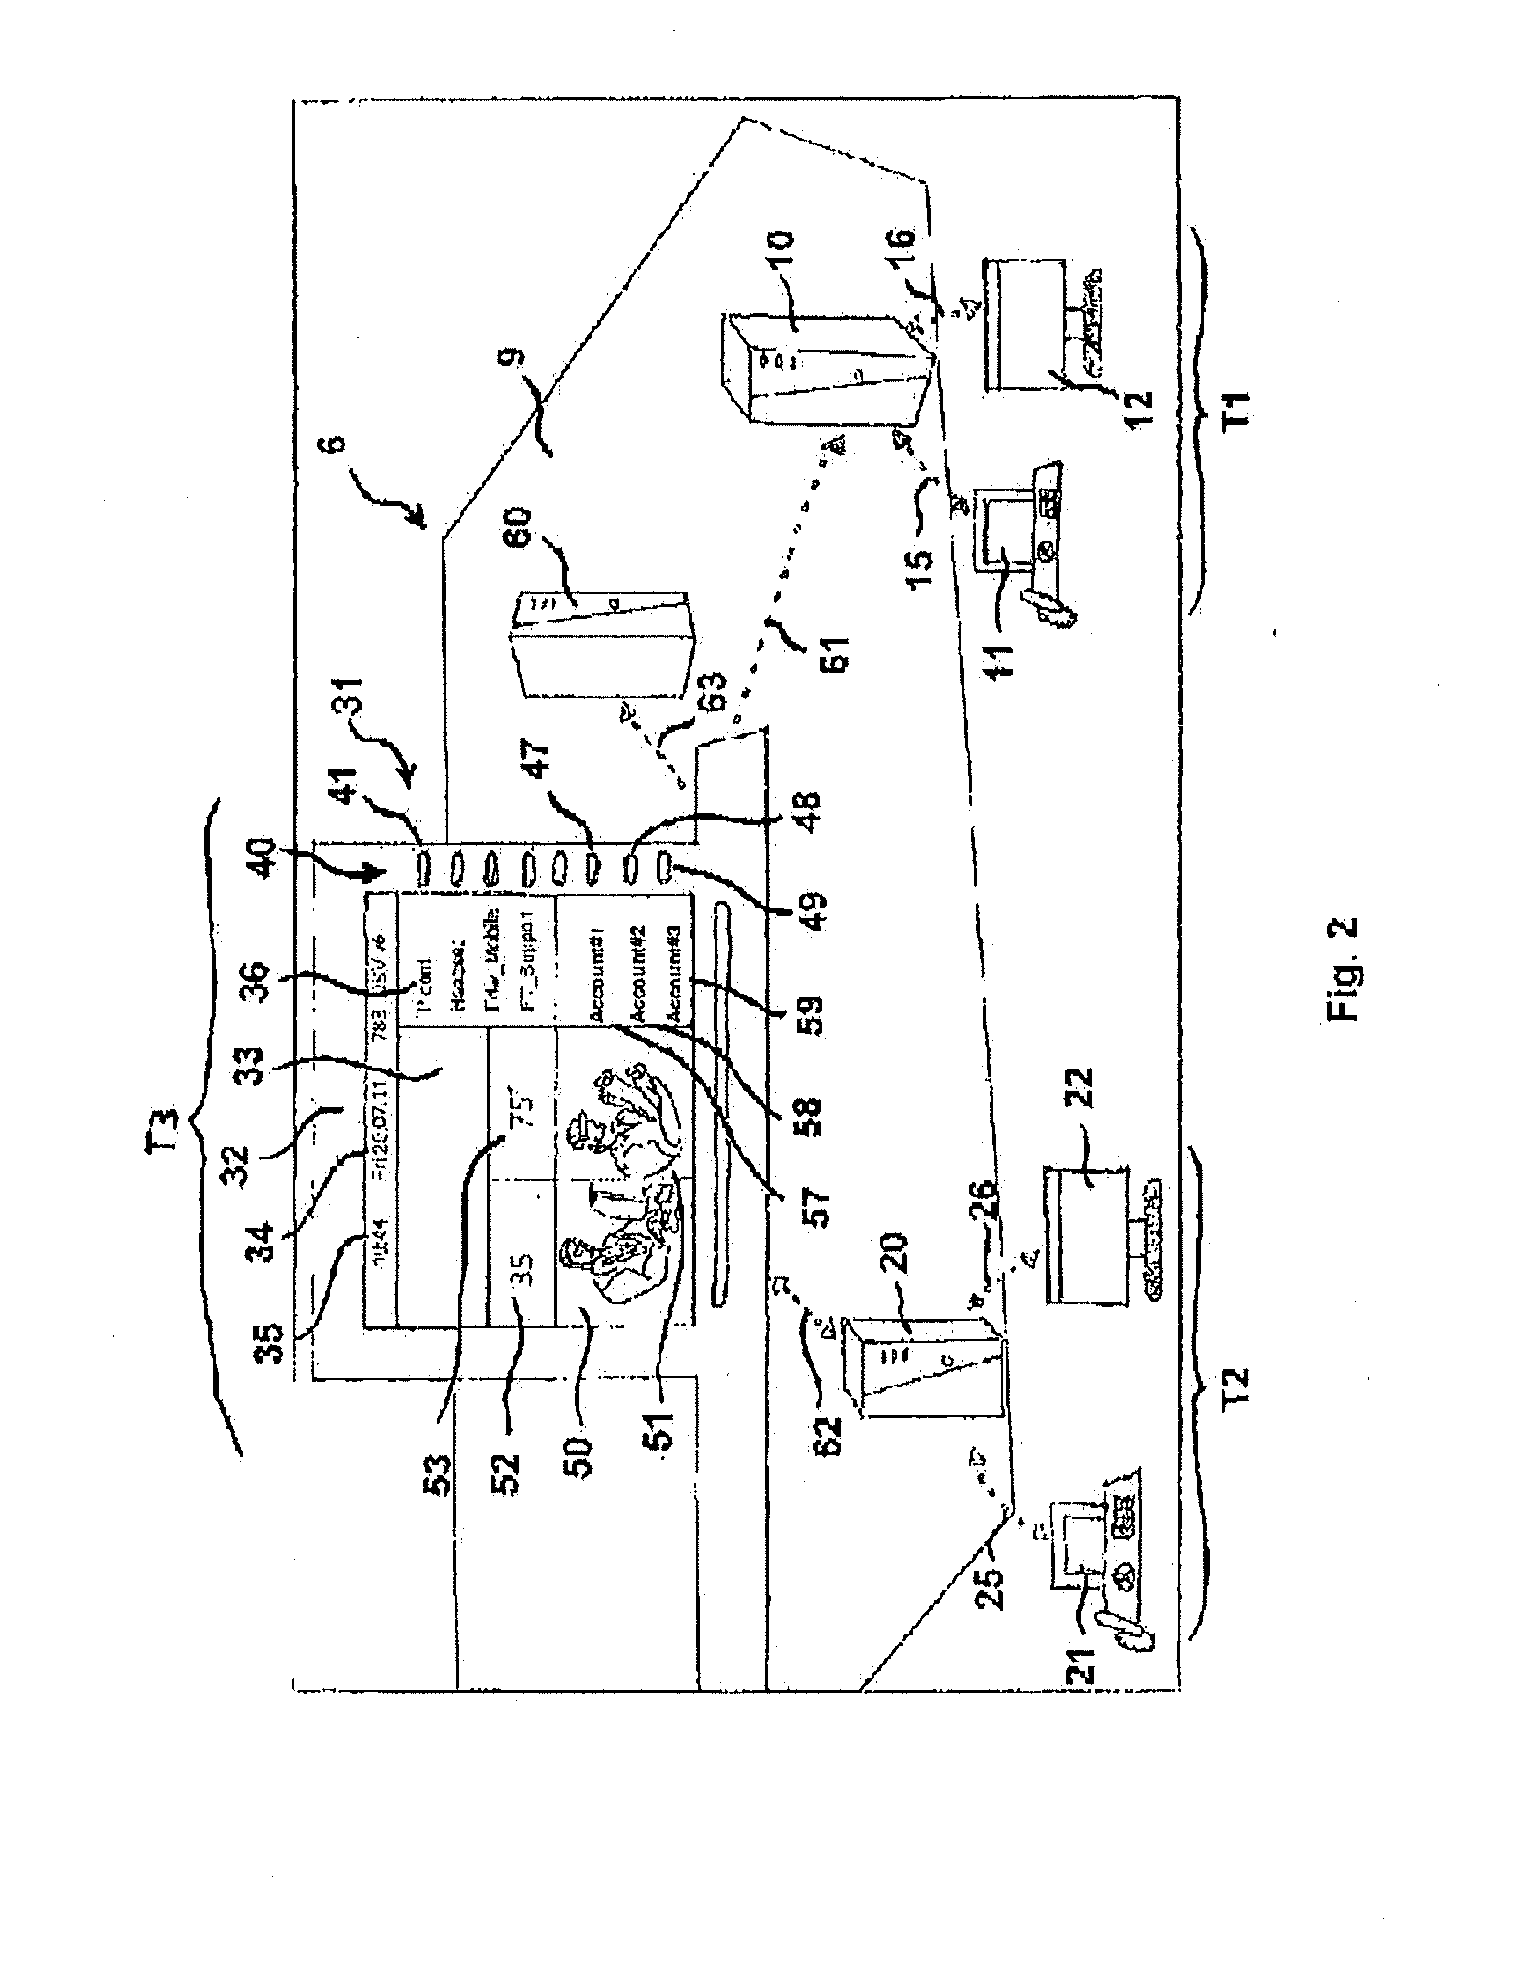 Method and apparatus for providing data produced in a conference